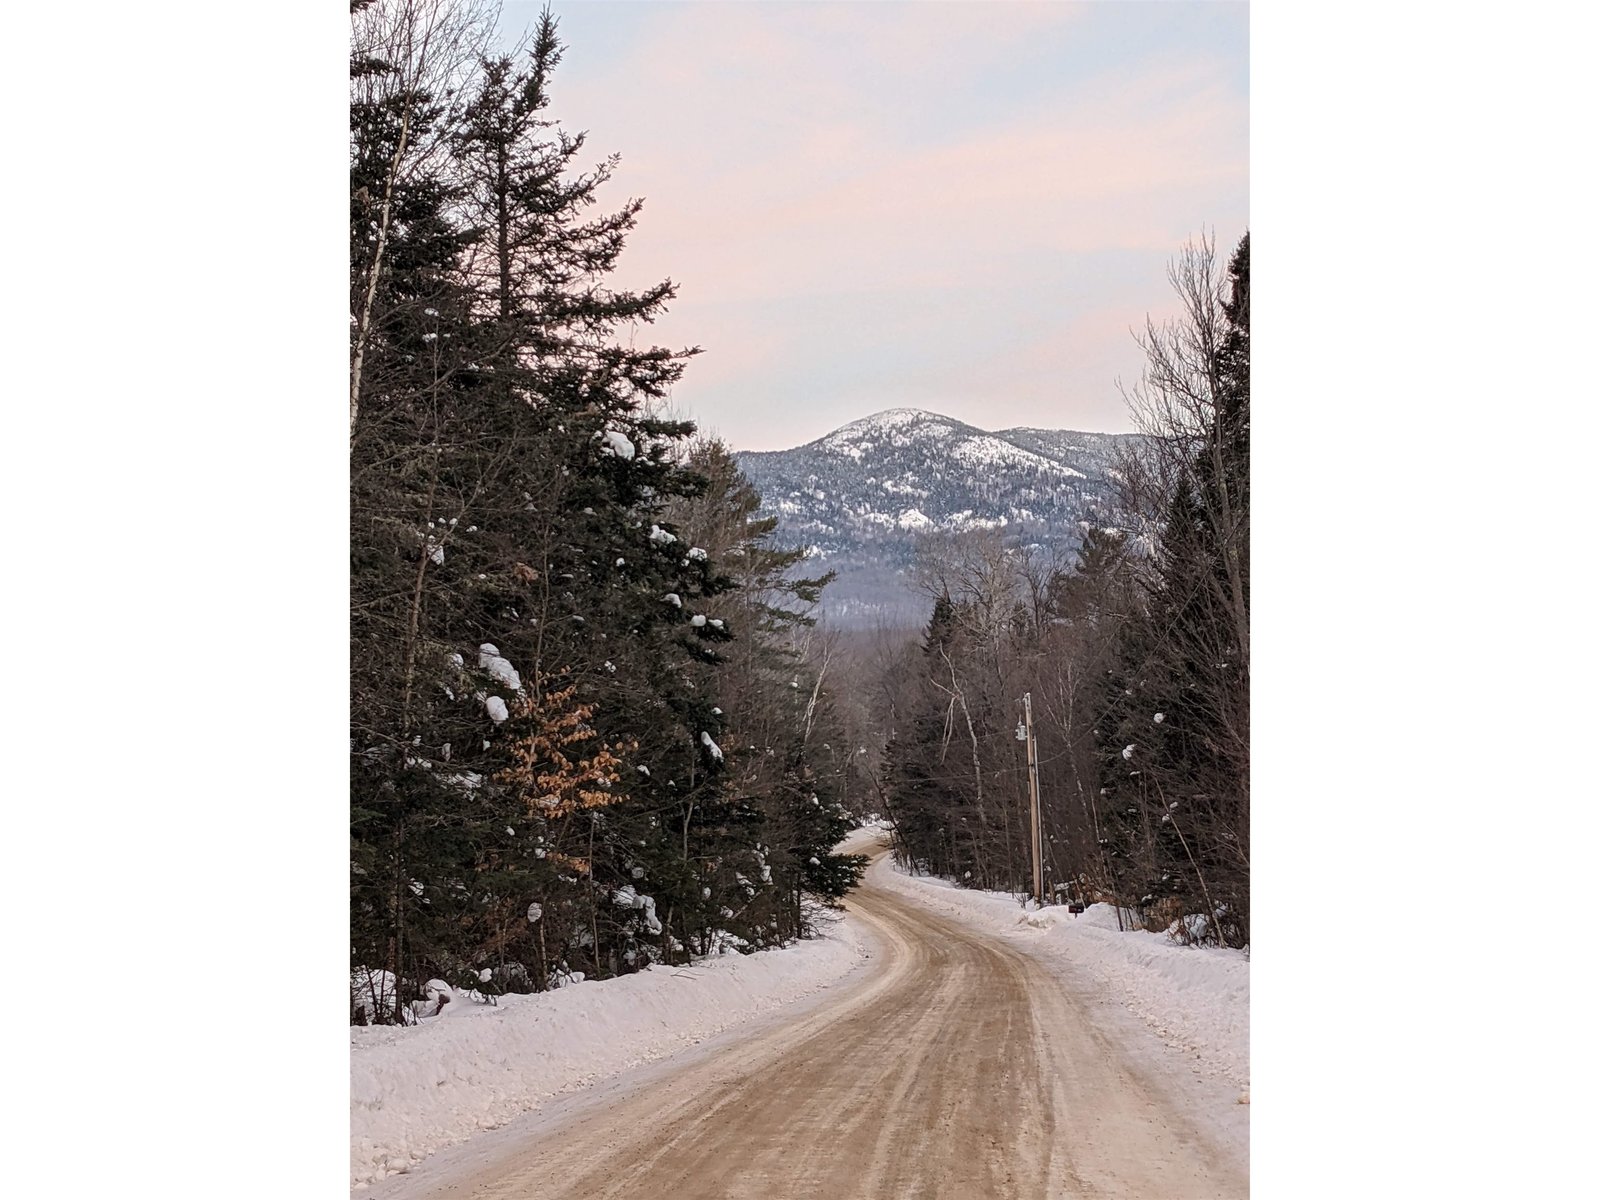 Winter road view- Mt Hunger in the distance